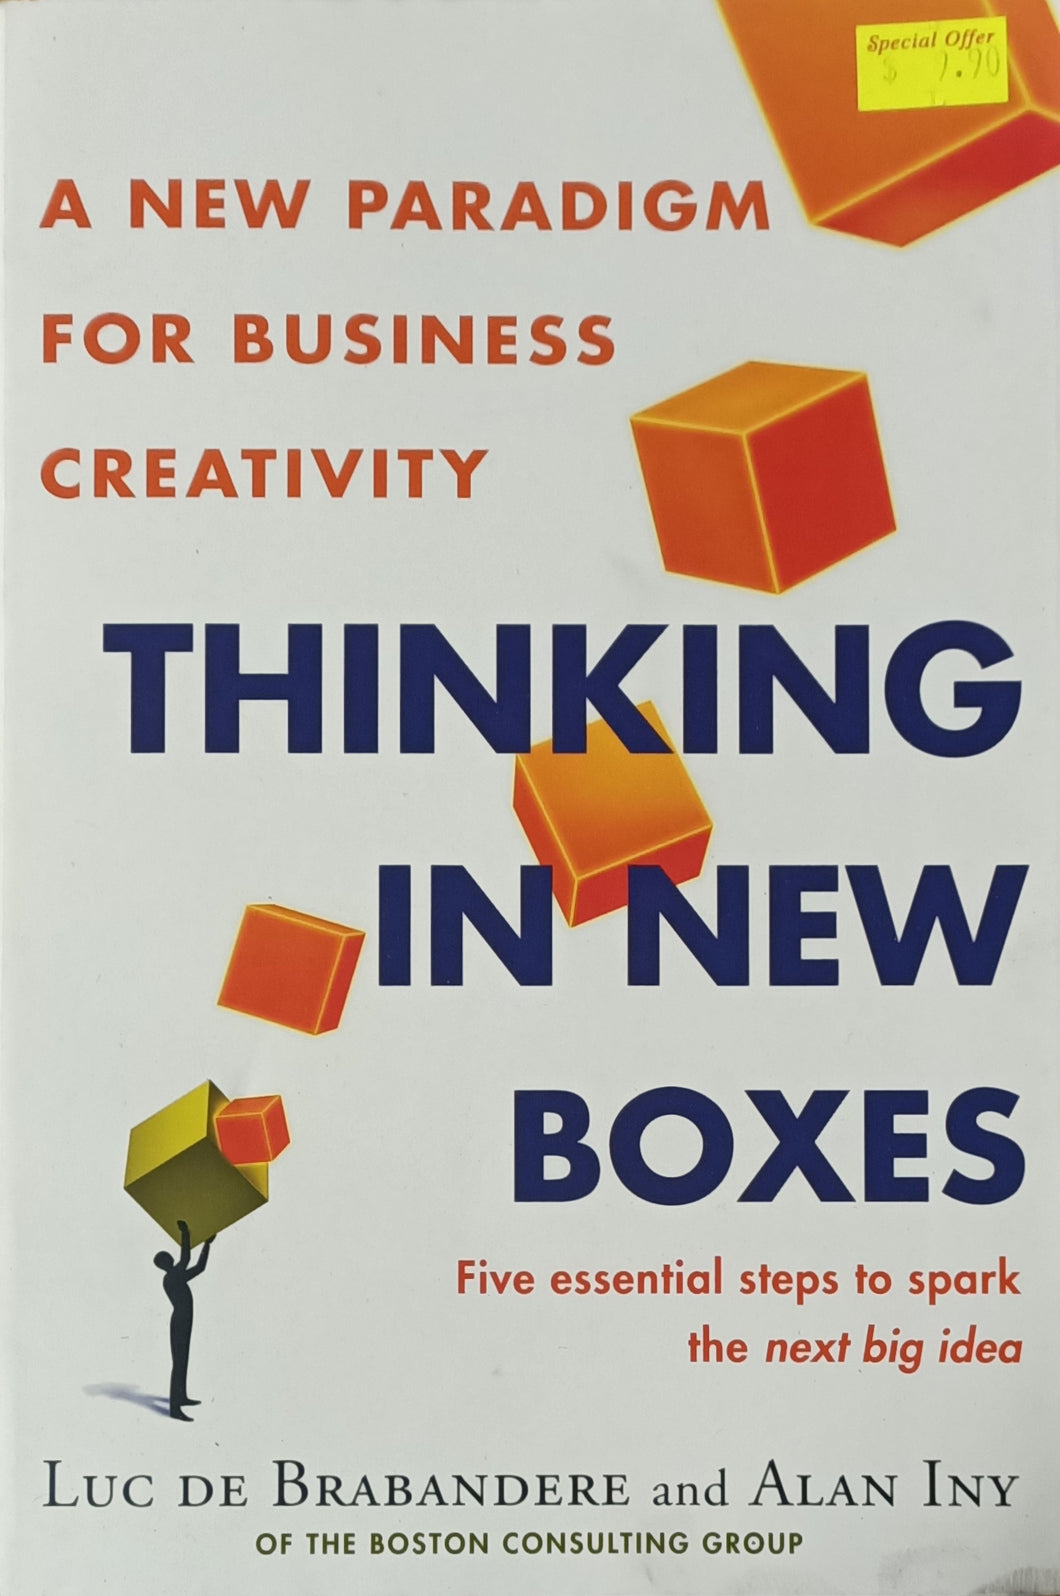 Thinking in New Boxes: A New Paradigm For Business Creativity - Luc De Brabandere & Alan Iny